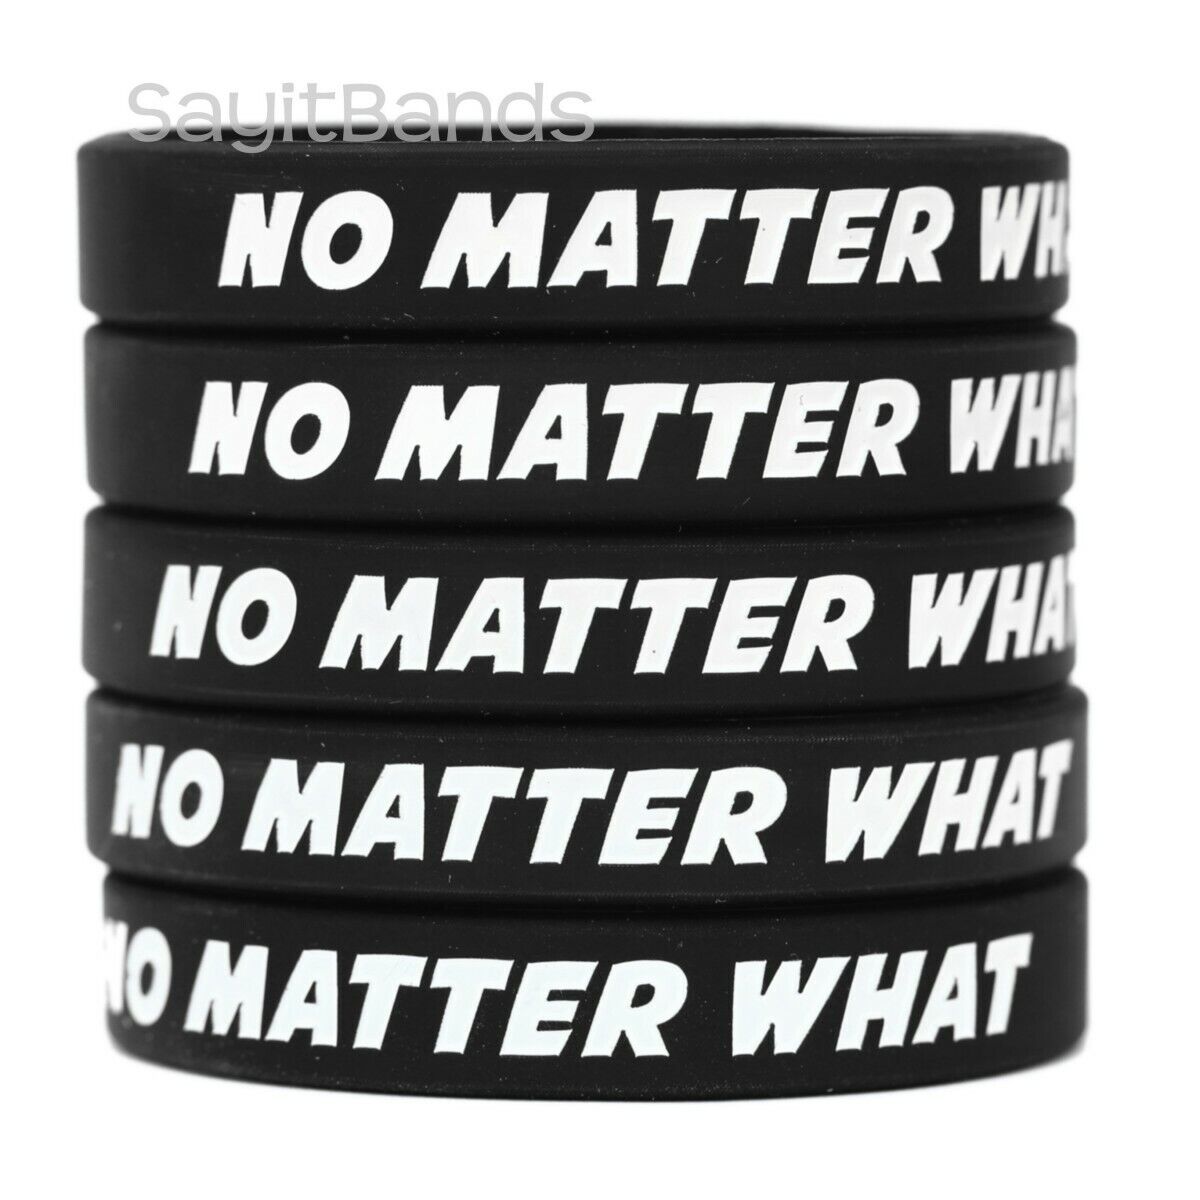 【83%OFF!】 5 No Matter What Wristbands Br - Inspiration WEB限定 Motivation Recovery